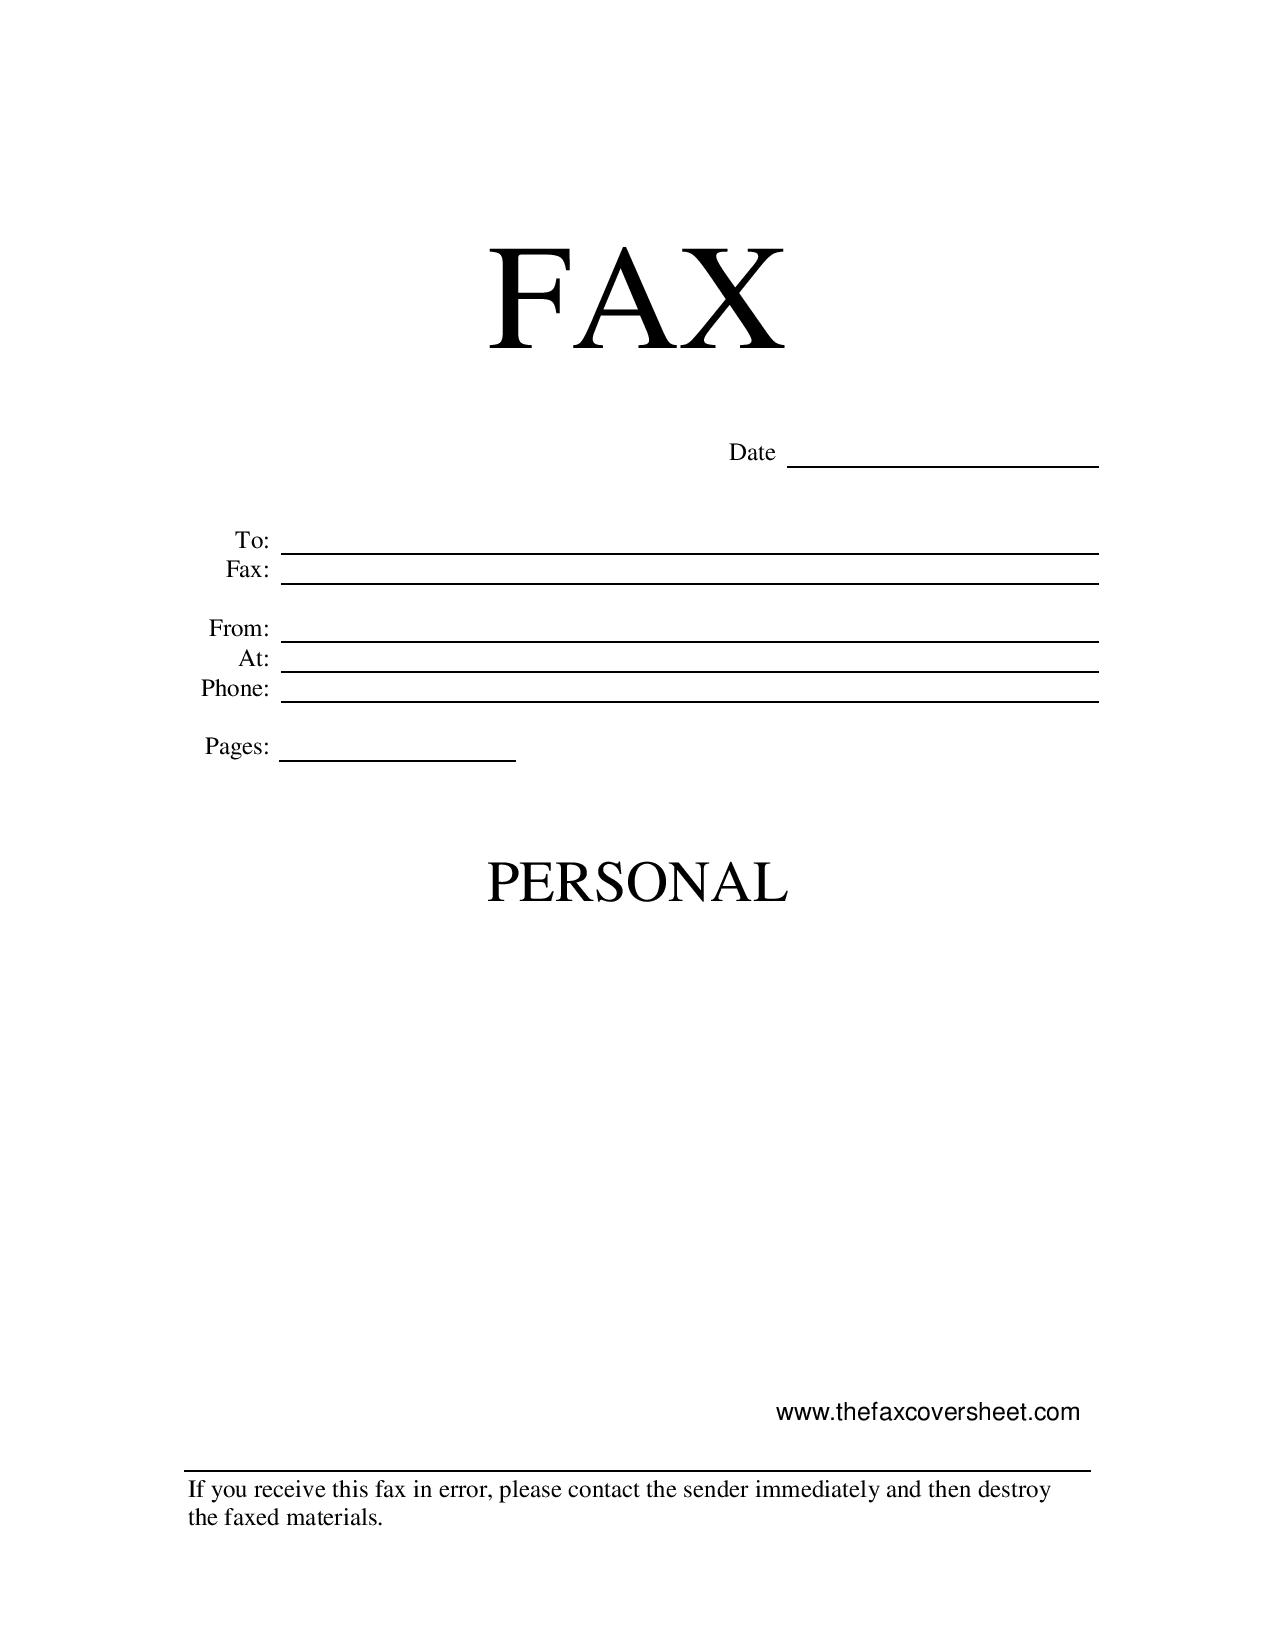 free-printable-fax-cover-sheet-without-downloading